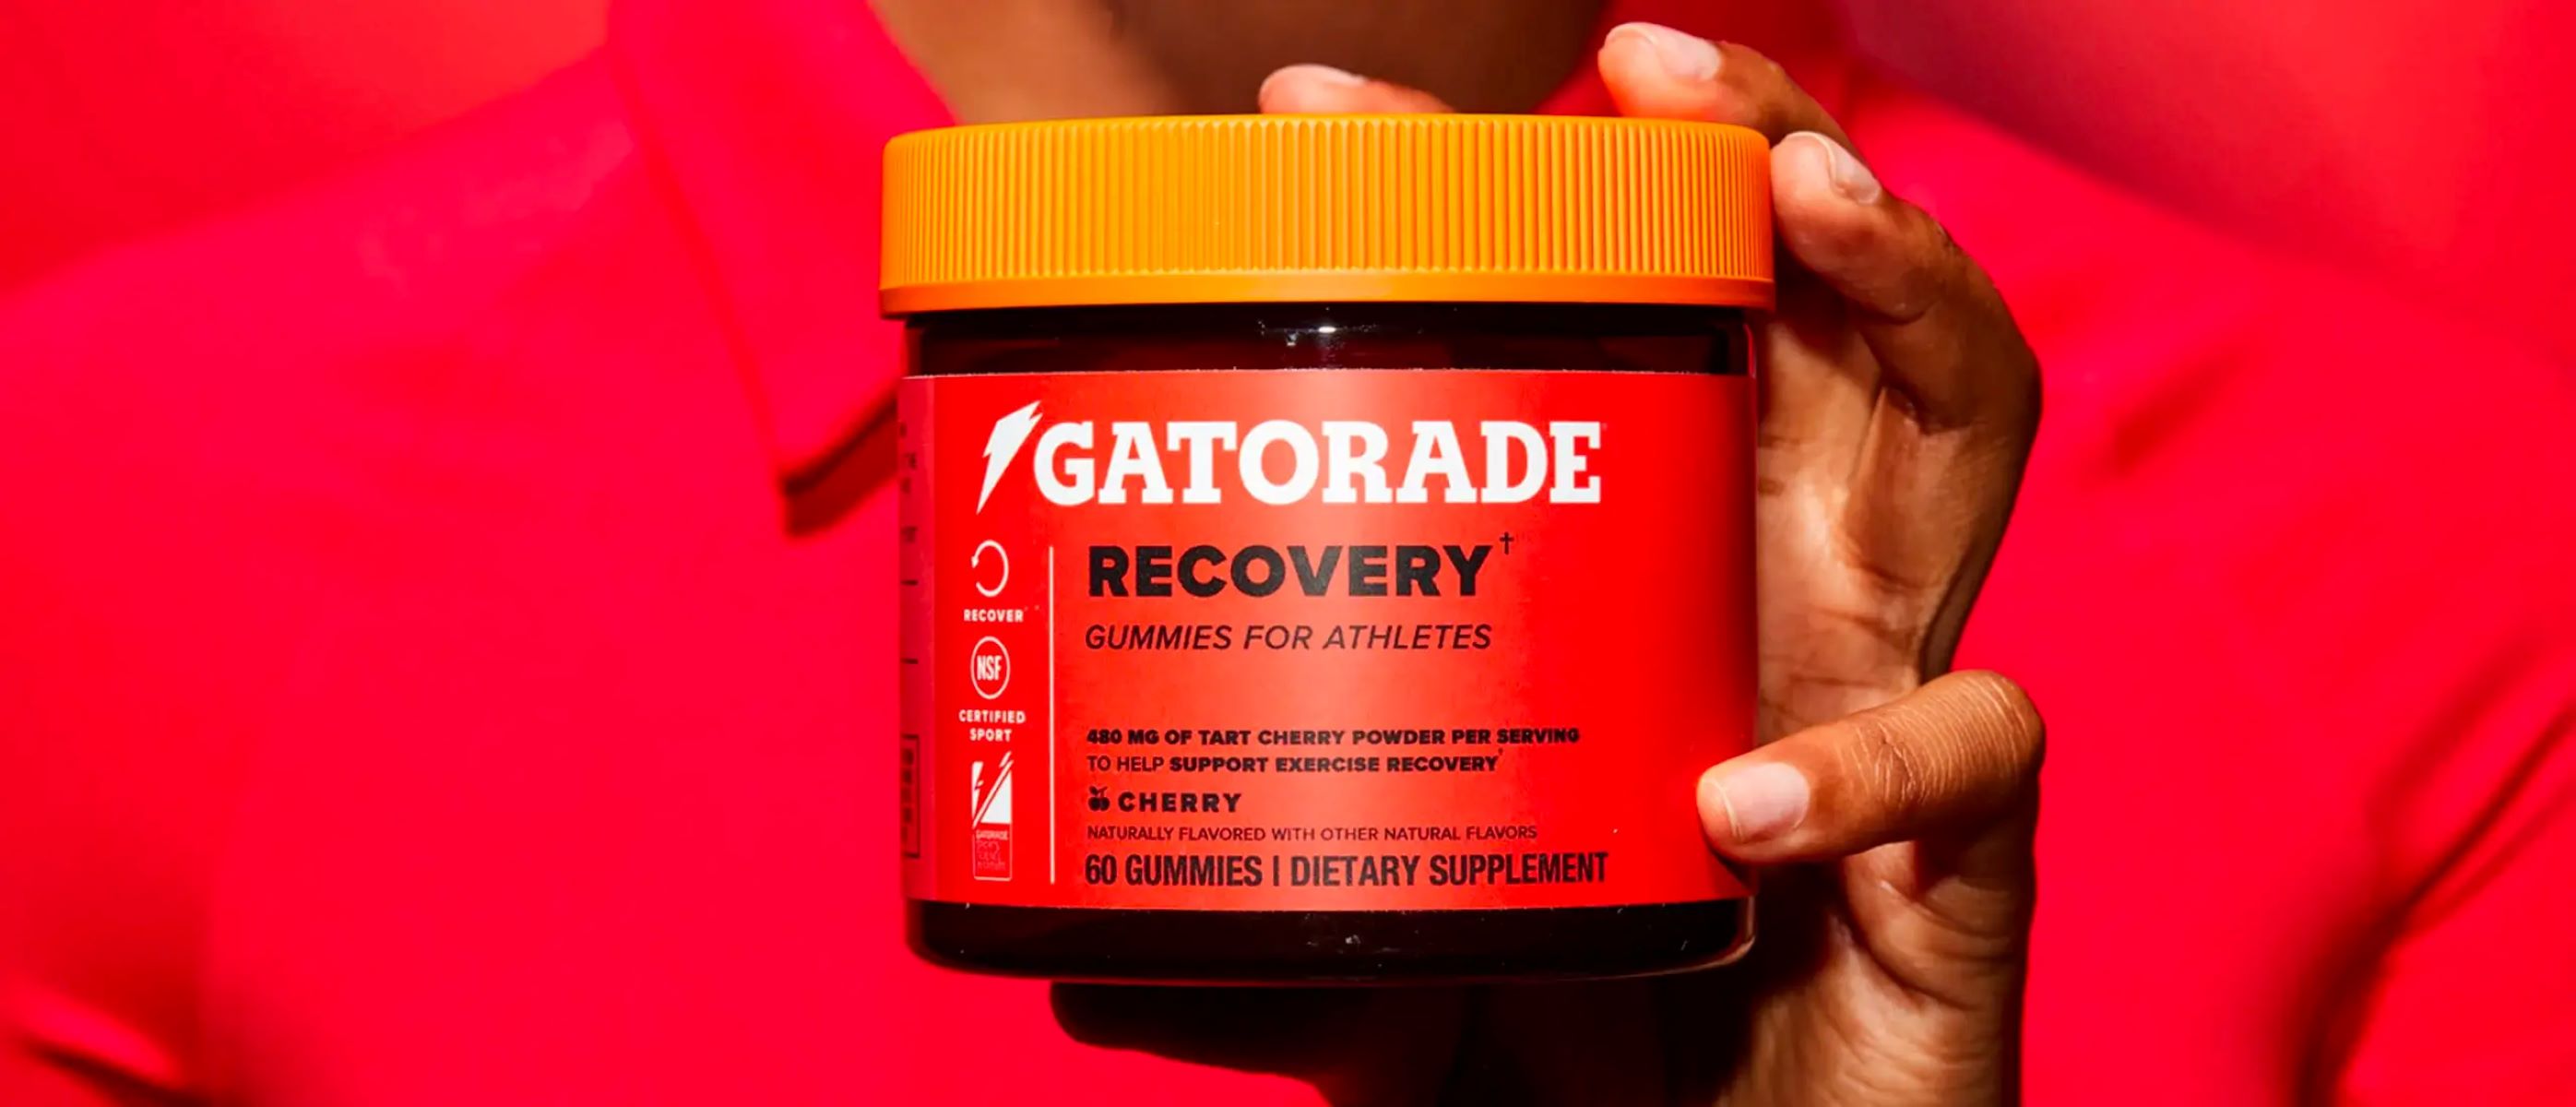 19-gatorade-recovery-nutrition-facts